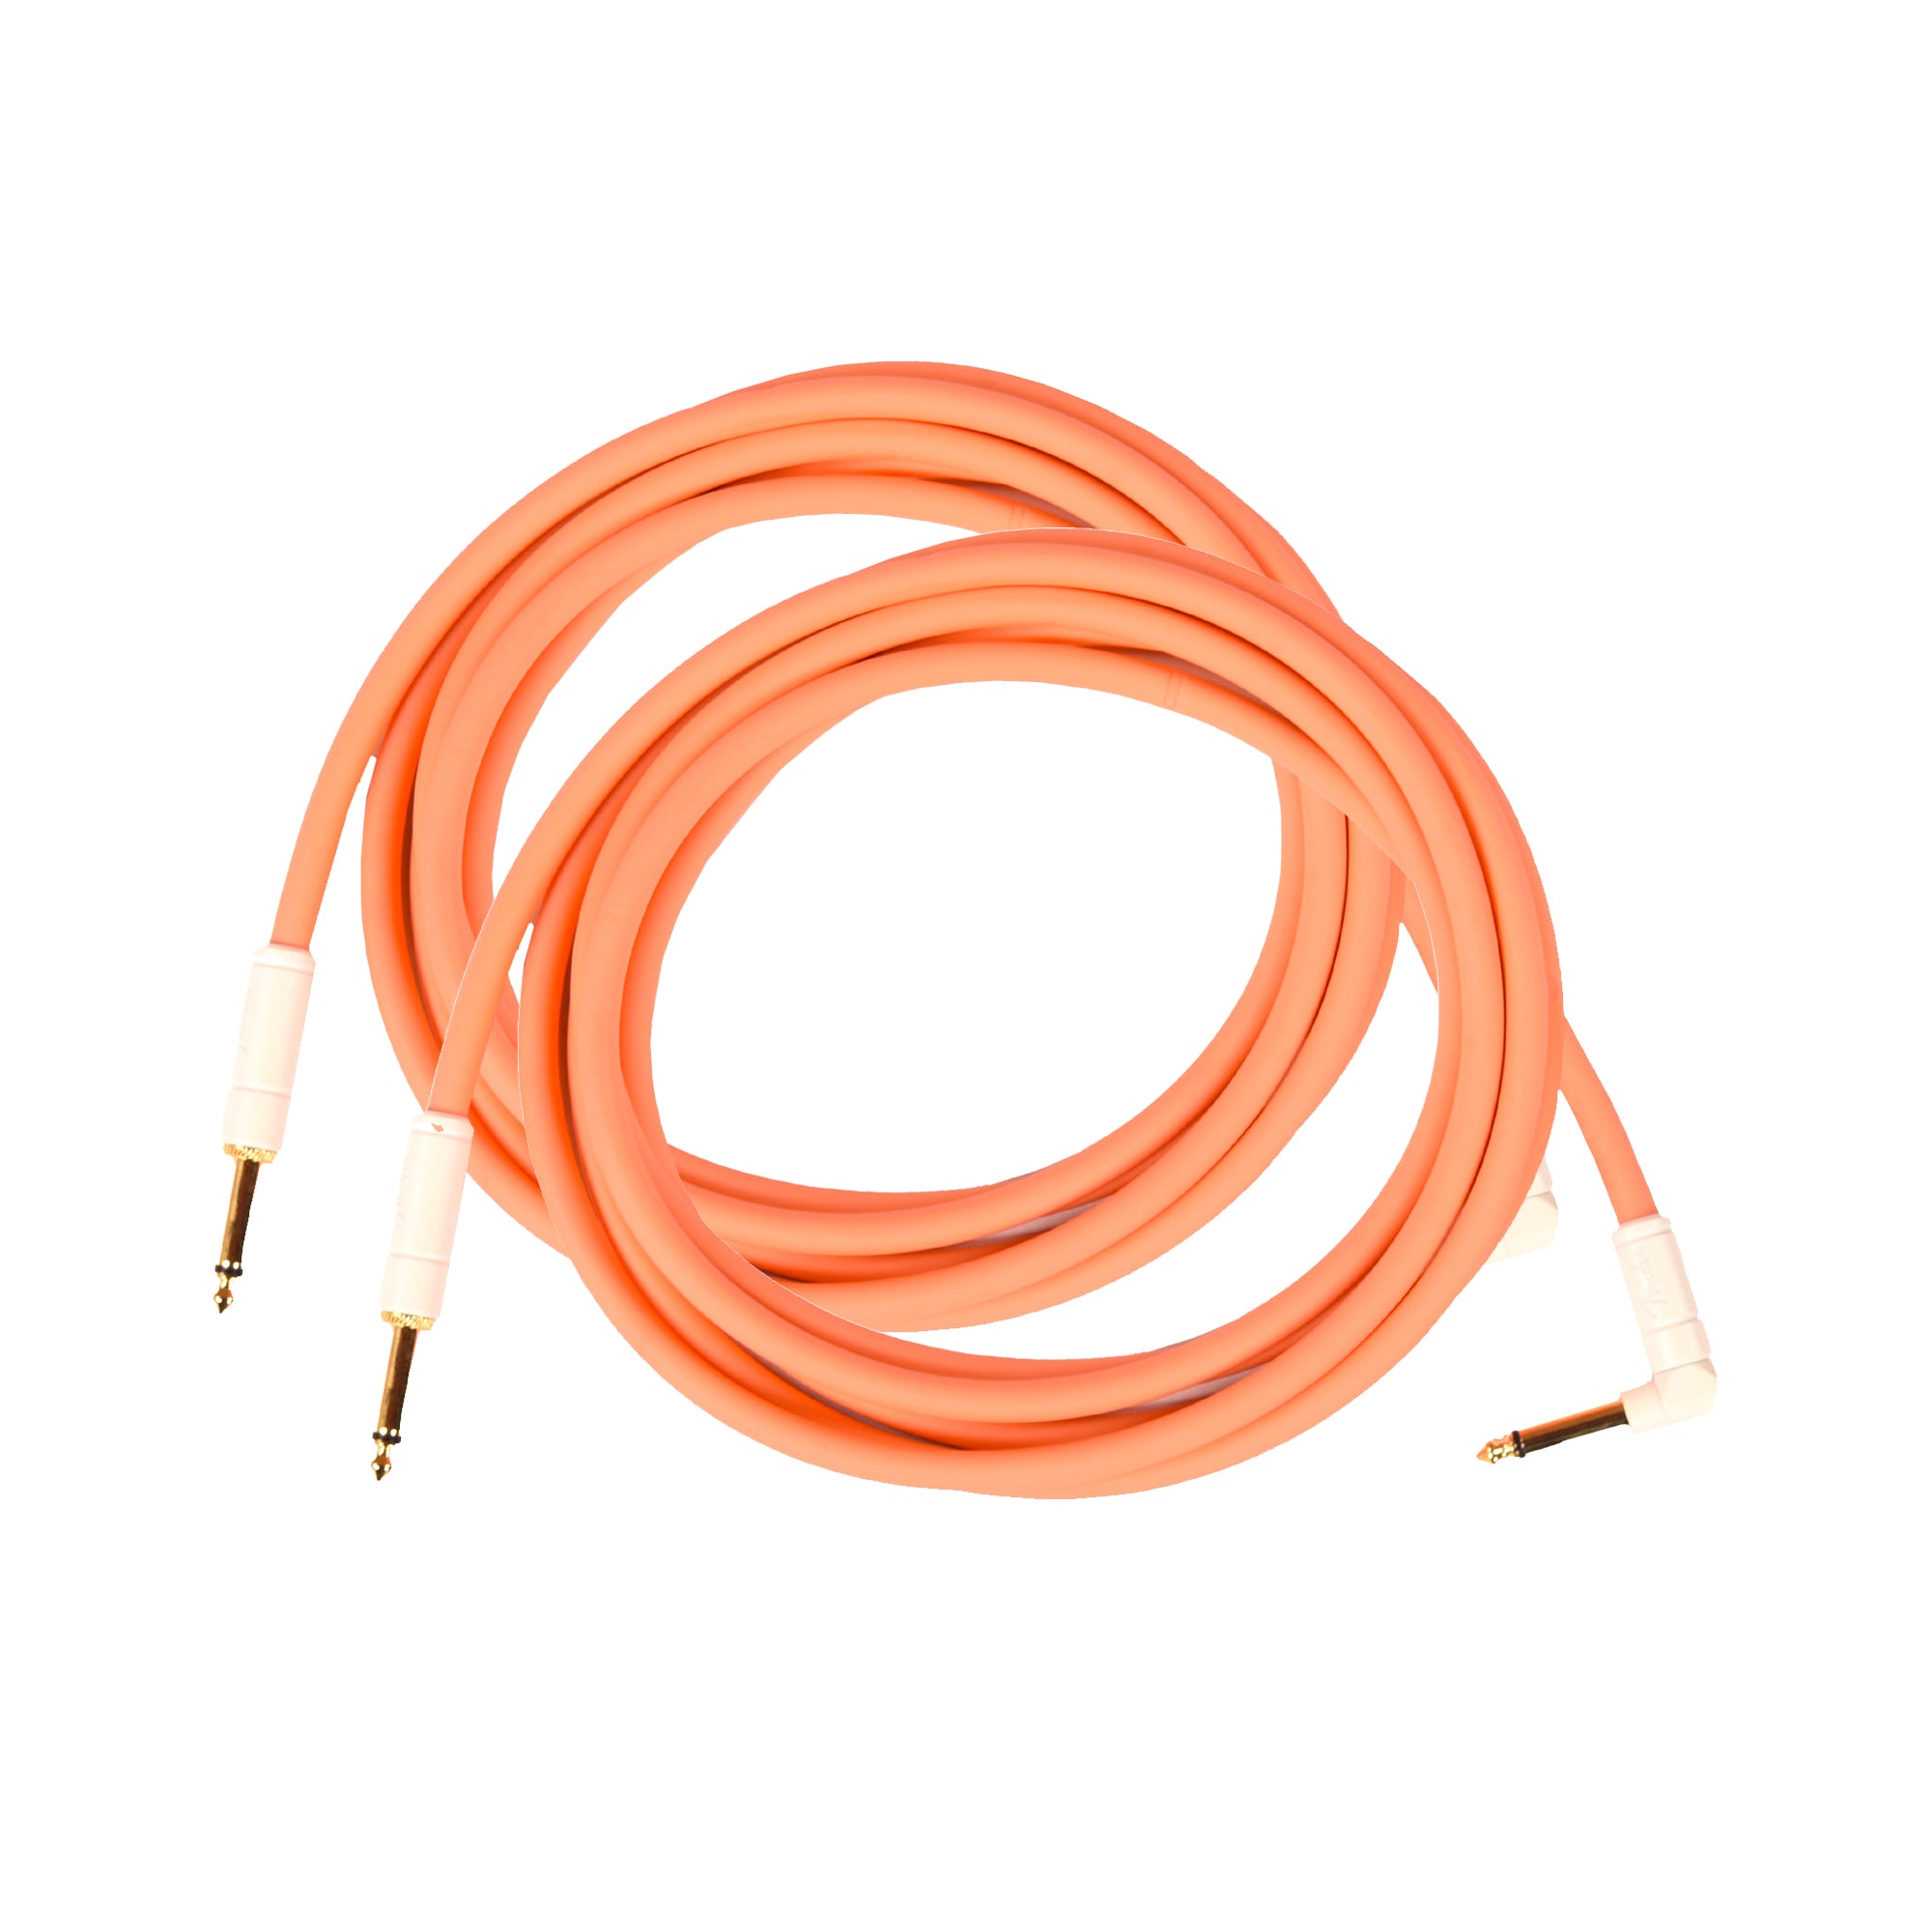 Fender Deluxe Instrument Cable Pacific Peach 18.6' Angle-Straight 2 Pack Bundle